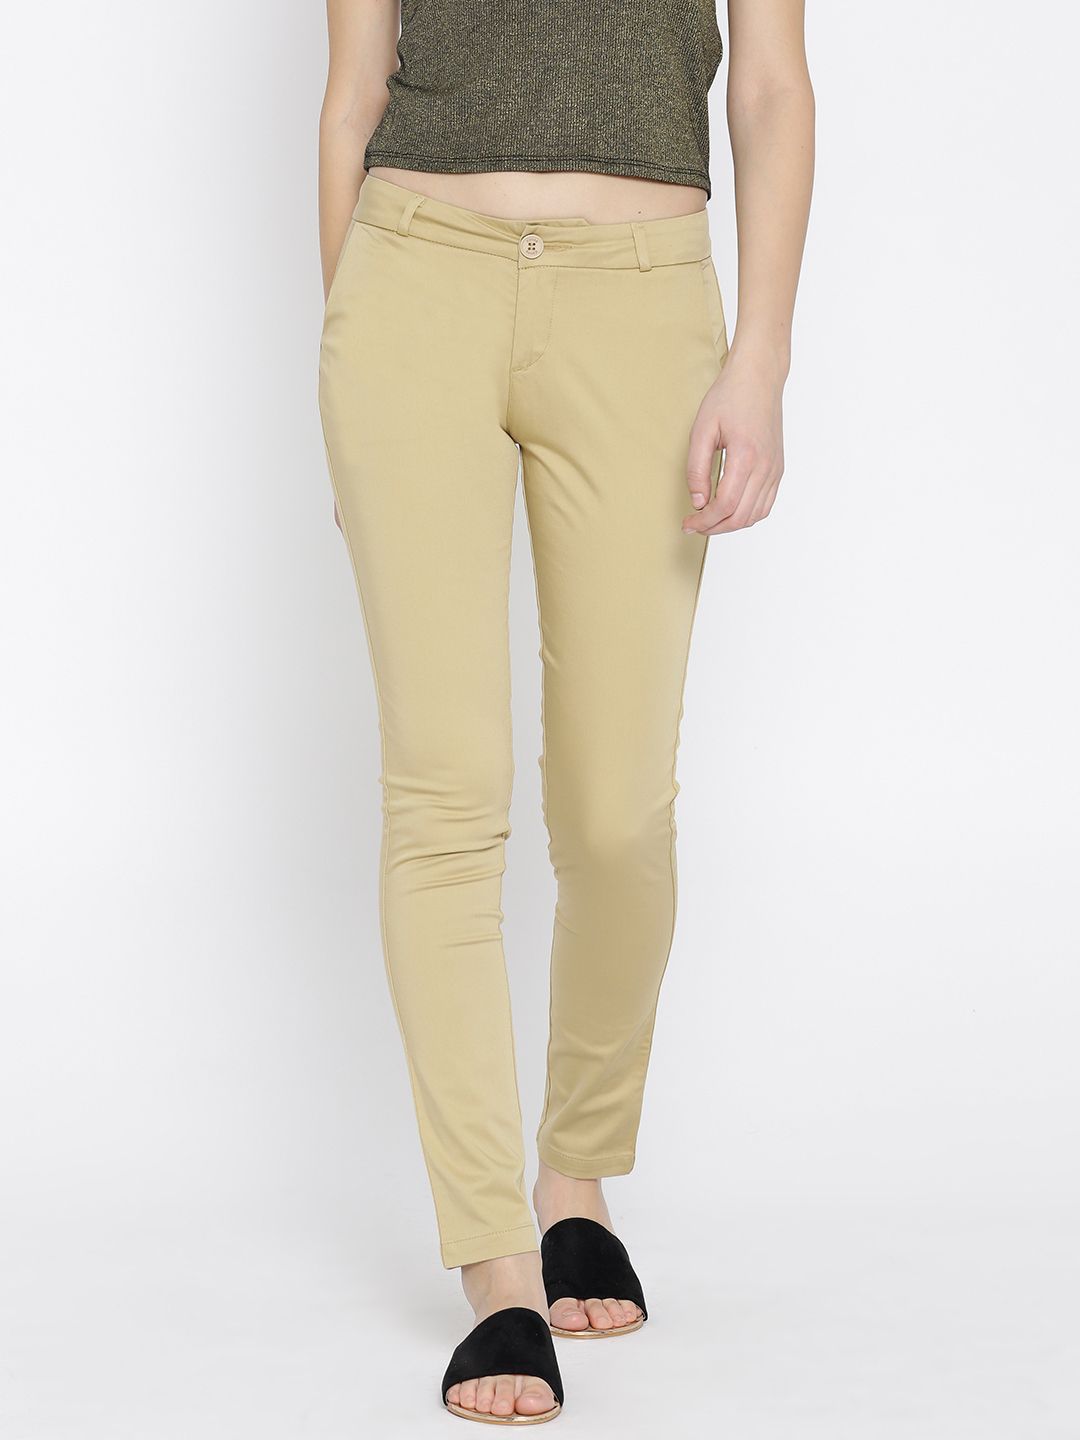 Xpose Women Beige Smart Slim Fit Solid Regular Trousers Price in India